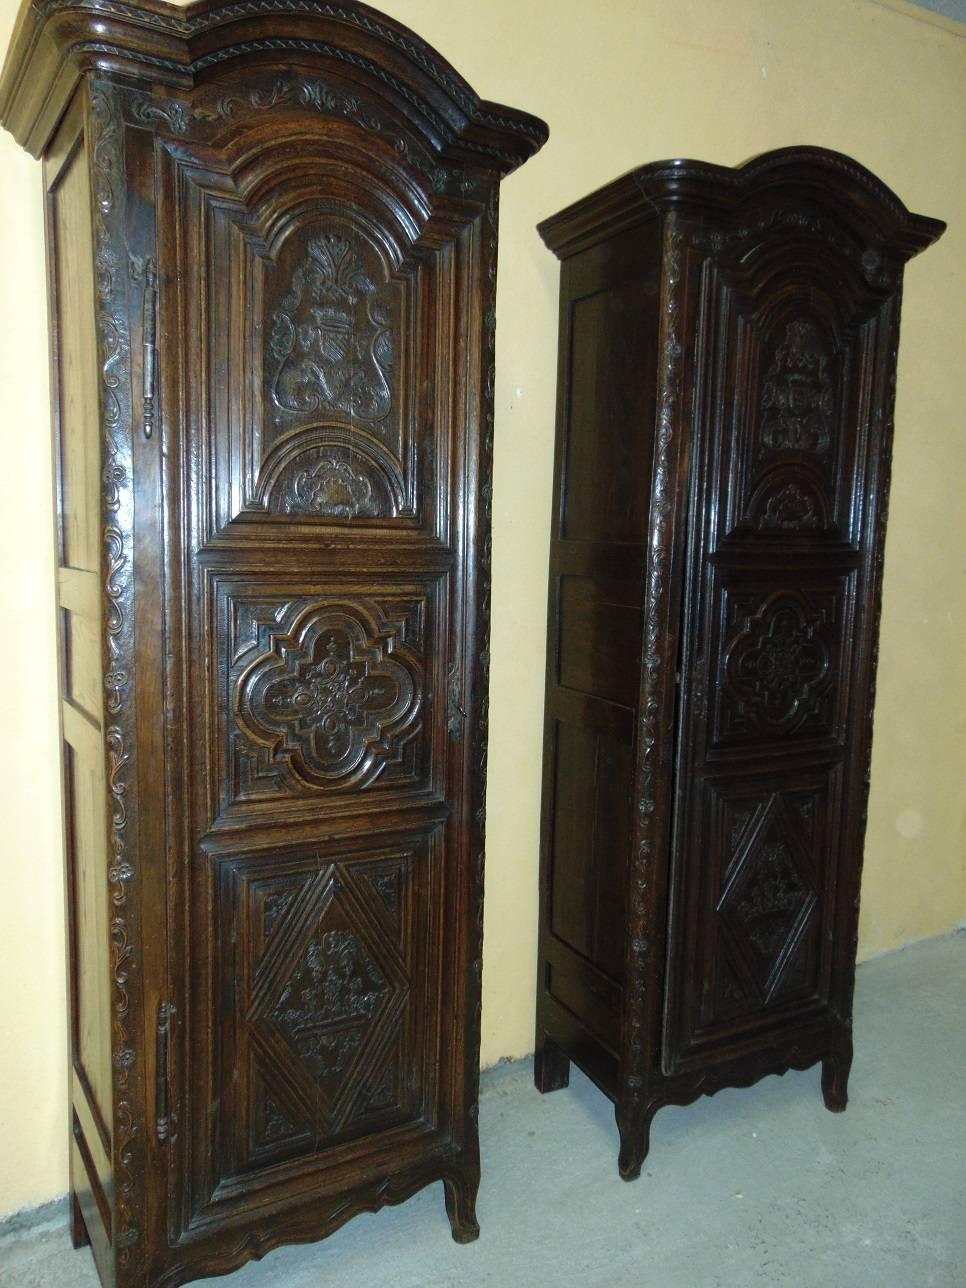 FREE WORLDWIDE SHIPPING OFFERED ON THIS ITEM 
A very rare and important pair of French marriage Armoires (Bonnetieres) from Normandy made in the mid-1700s in solid oak and richly carved with the personal crests of the two families joined by this